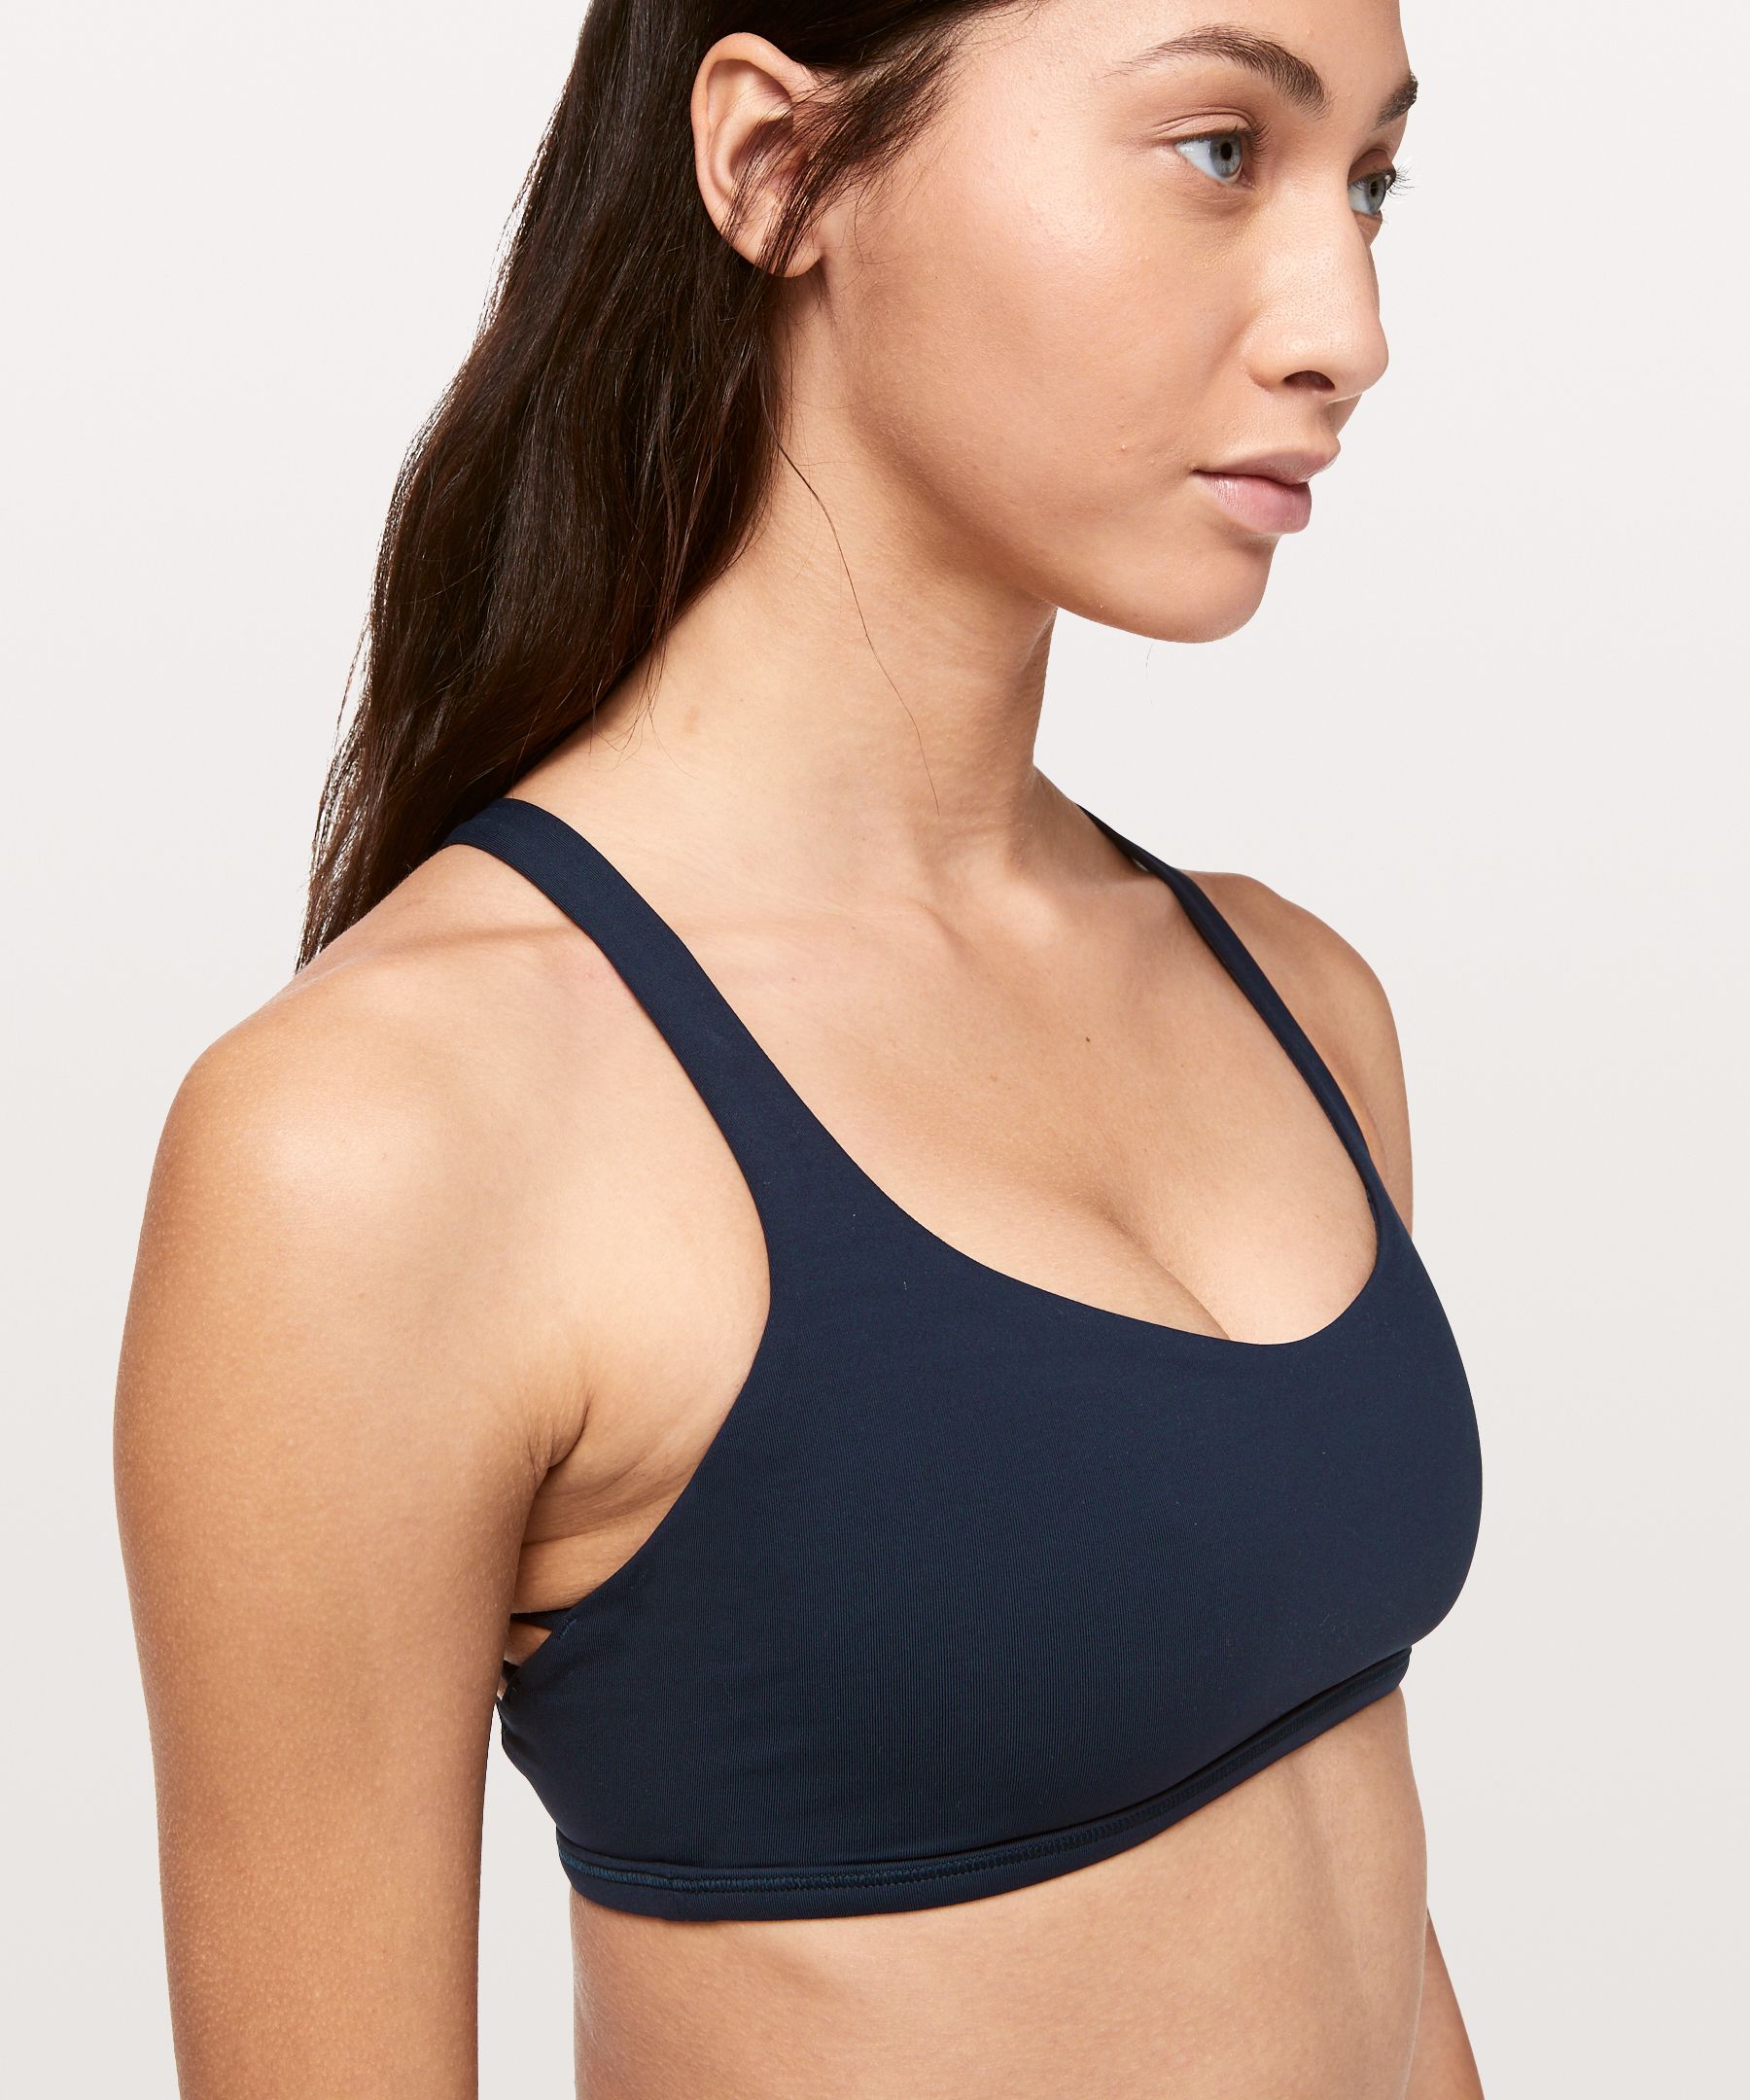 Lululemon Free to Be Bra - Wild *Light Support, A/B Cup - 139350944